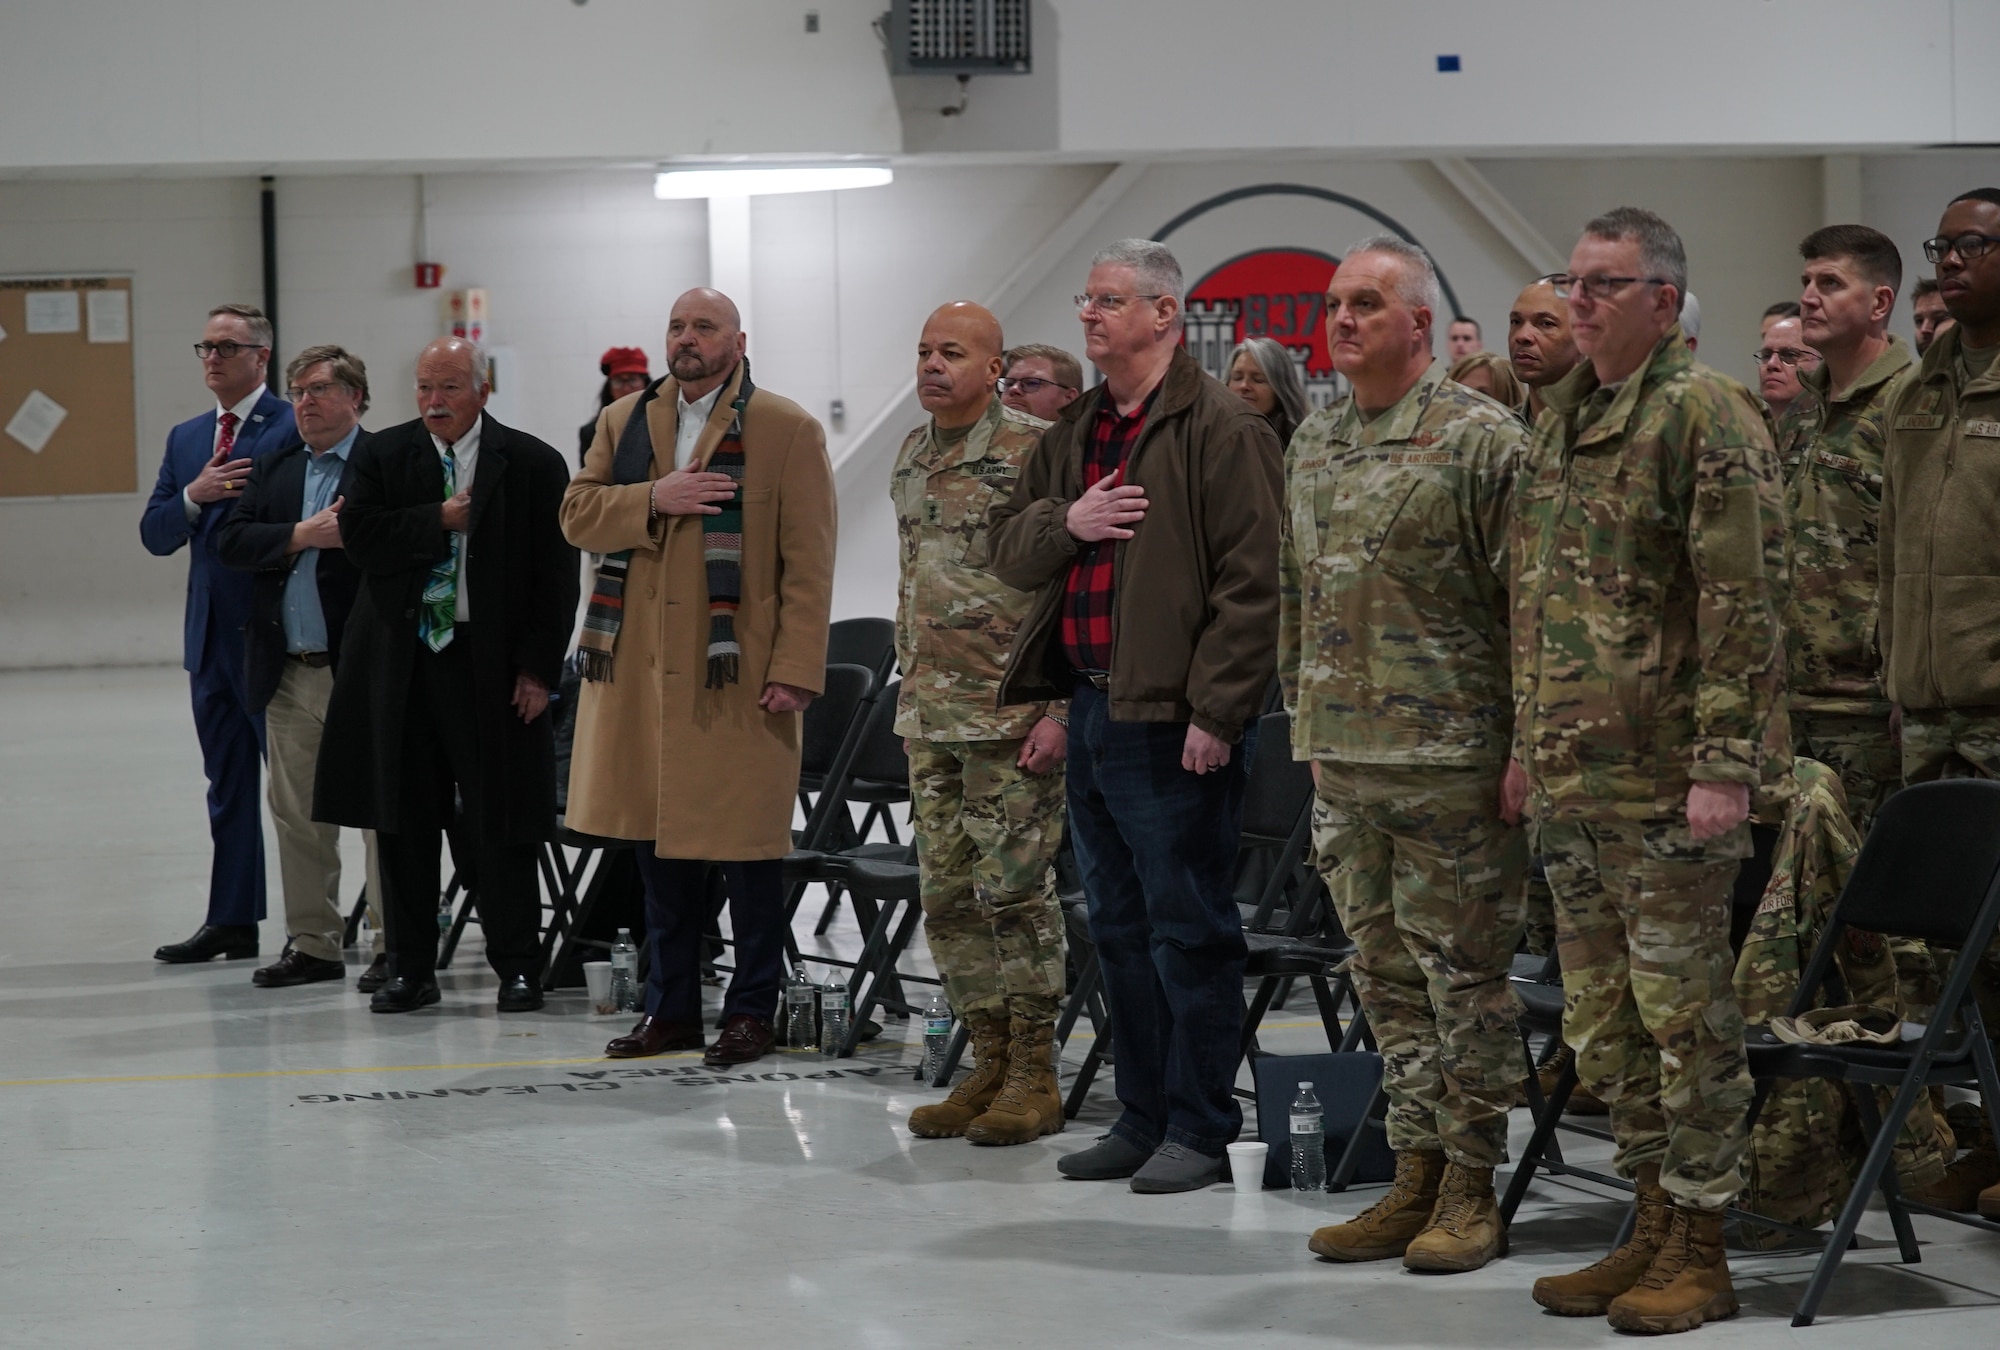 State officials, military leaders, and other community members gather for a presentation on the current capabilities and mission of the 178th Wing at Springfield-Beckley Air National Guard Base, Ohio, March 18, 2024. Airmen assigned to the 178th Wing recently completed a historic landing of the MQ-9 Reaper using auto take-off and land technology. (U.S. Air National Guard photo by Staff Sgt. Jillian Maynus)